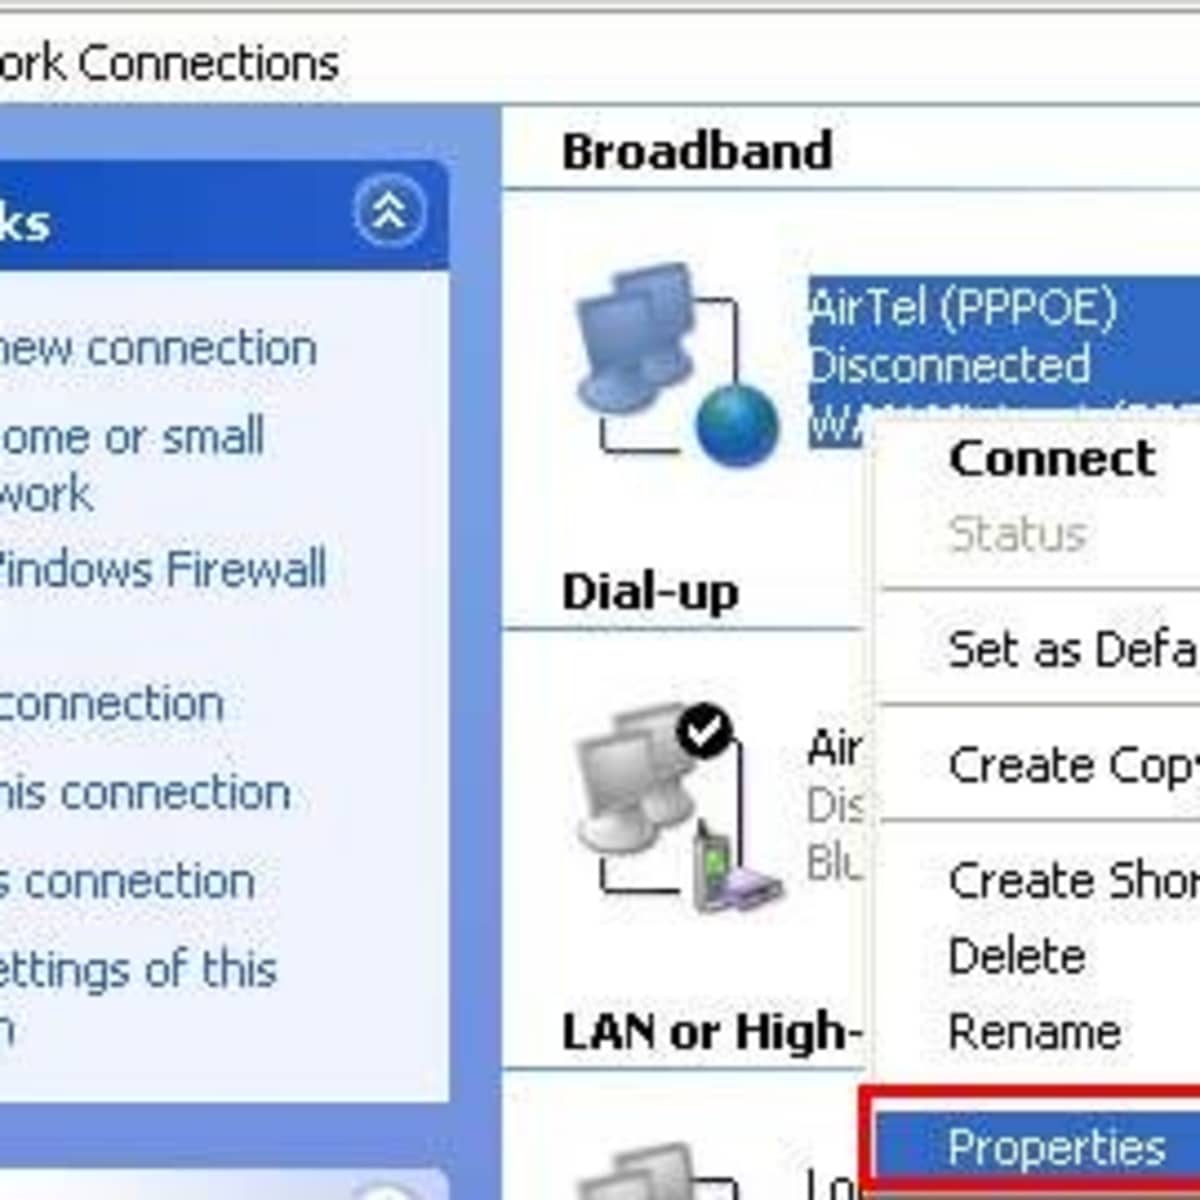 how to connect lan and wifi simultaneously